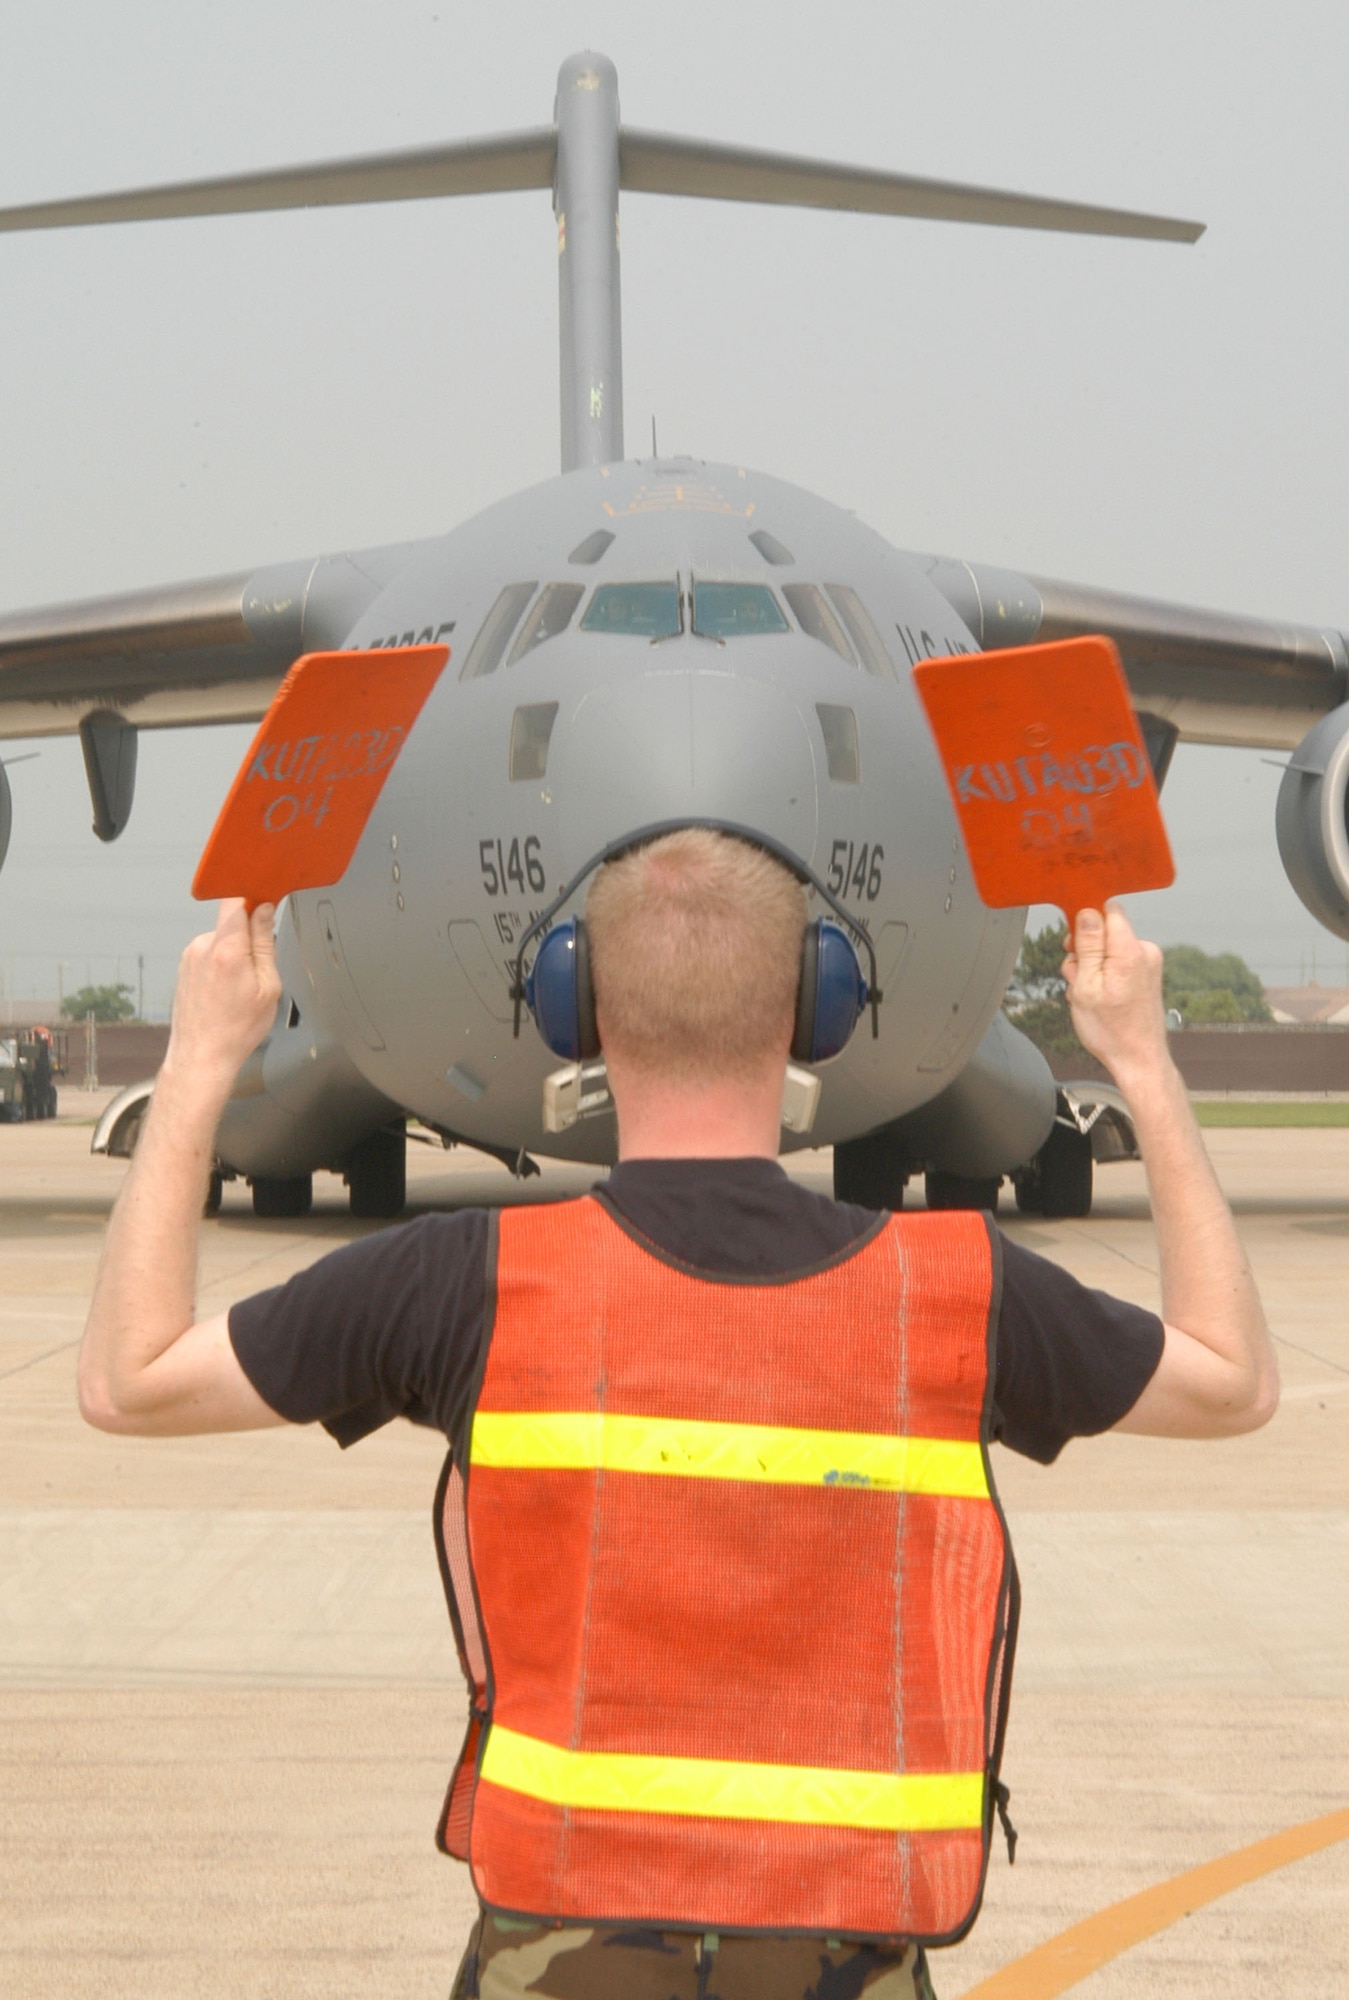 KUNSAN AIR BASE, Republic of Korea -- Senior Airman Korey Cornelis, 8th Maintenance Squadron transient alert/crash recovery specialist, marshals the "Spirit of Hawaii" into its parking spot July 8. The C-17 Globemaster III, assigned to Hickam Air Force Base, Hawaii, airlifted more than 40 maintainers and equipment  from the 555th Expeditionary Fighter Squadron "Triple Nickel" here as part of their air expeditionary force requirements. More than 10 F-16 Fighting Falcons assigned to the 555th EFS arrived July 7. (U.S. Air Force photo/Senior Airman Stephen Collier)                              